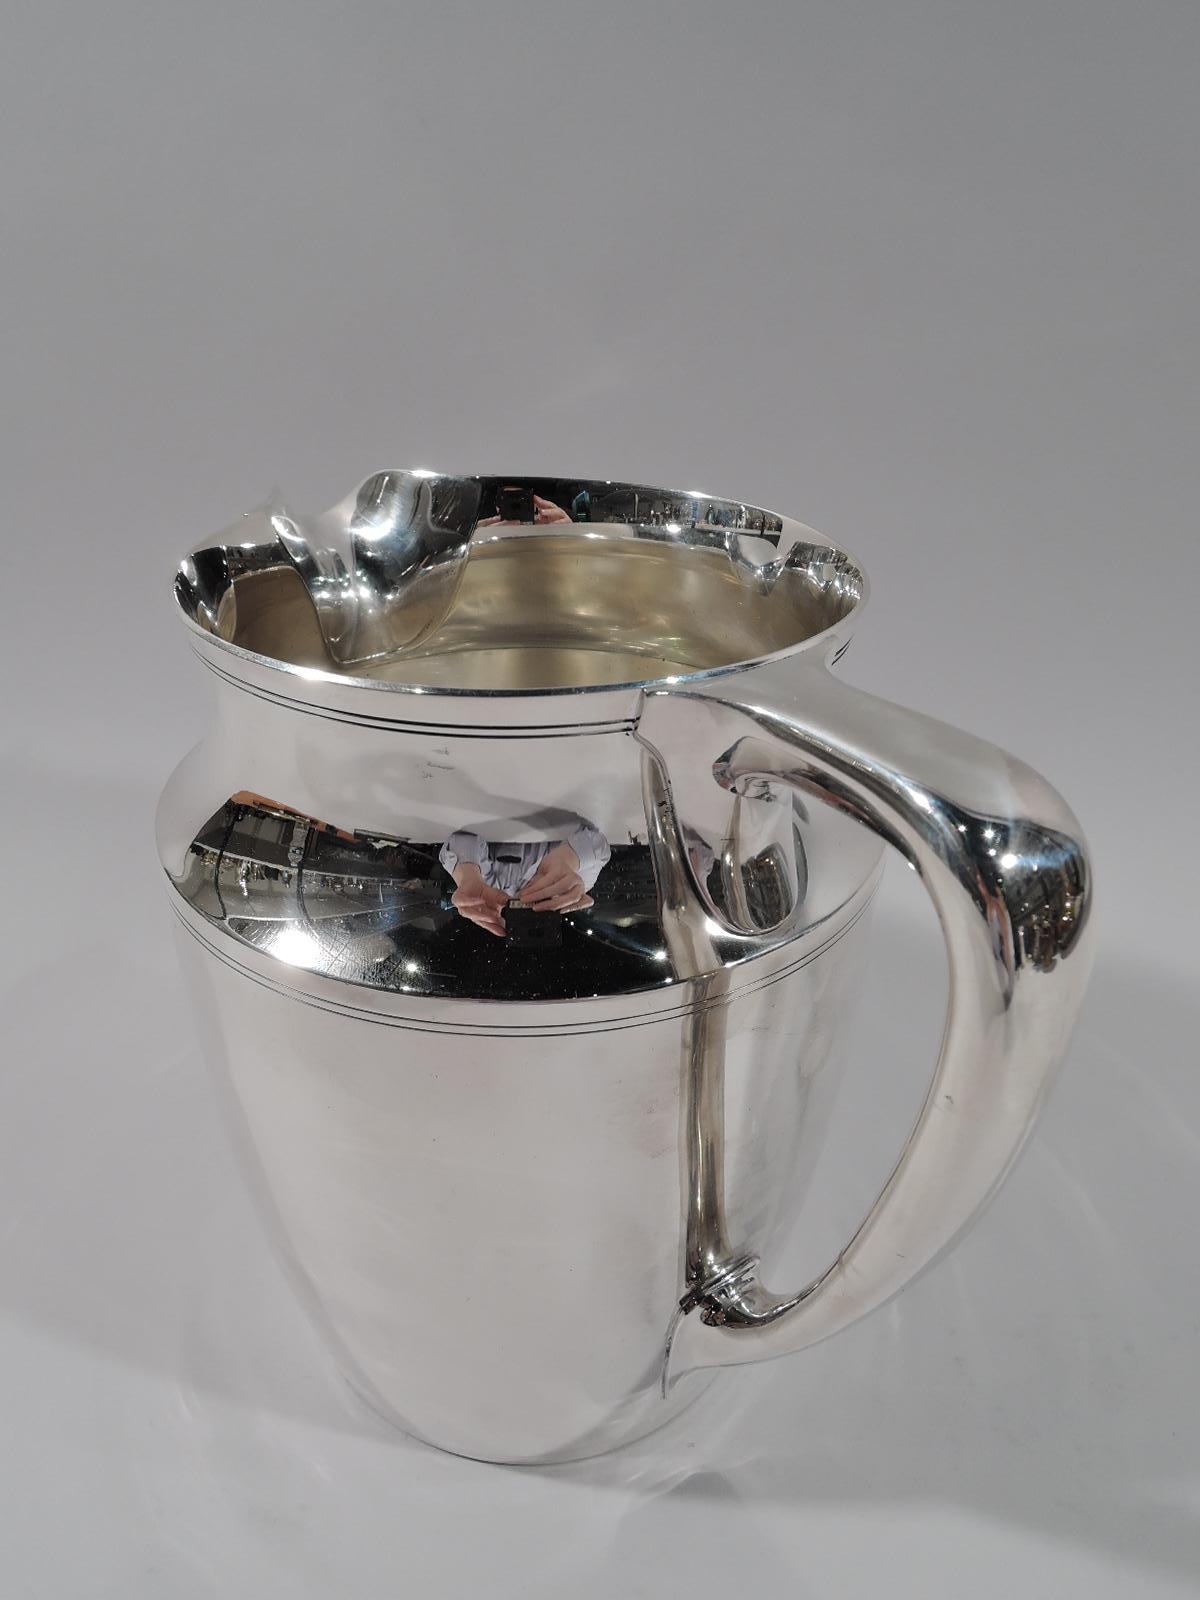 Modern sterling silver water pitcher. Made by Tiffany & Co. in New York. Gently curved and tapering sides, concave neck, and scroll bracket handle. Double linear bands incised at rim, shoulder, and base. Fully marked including pattern no. 20211,